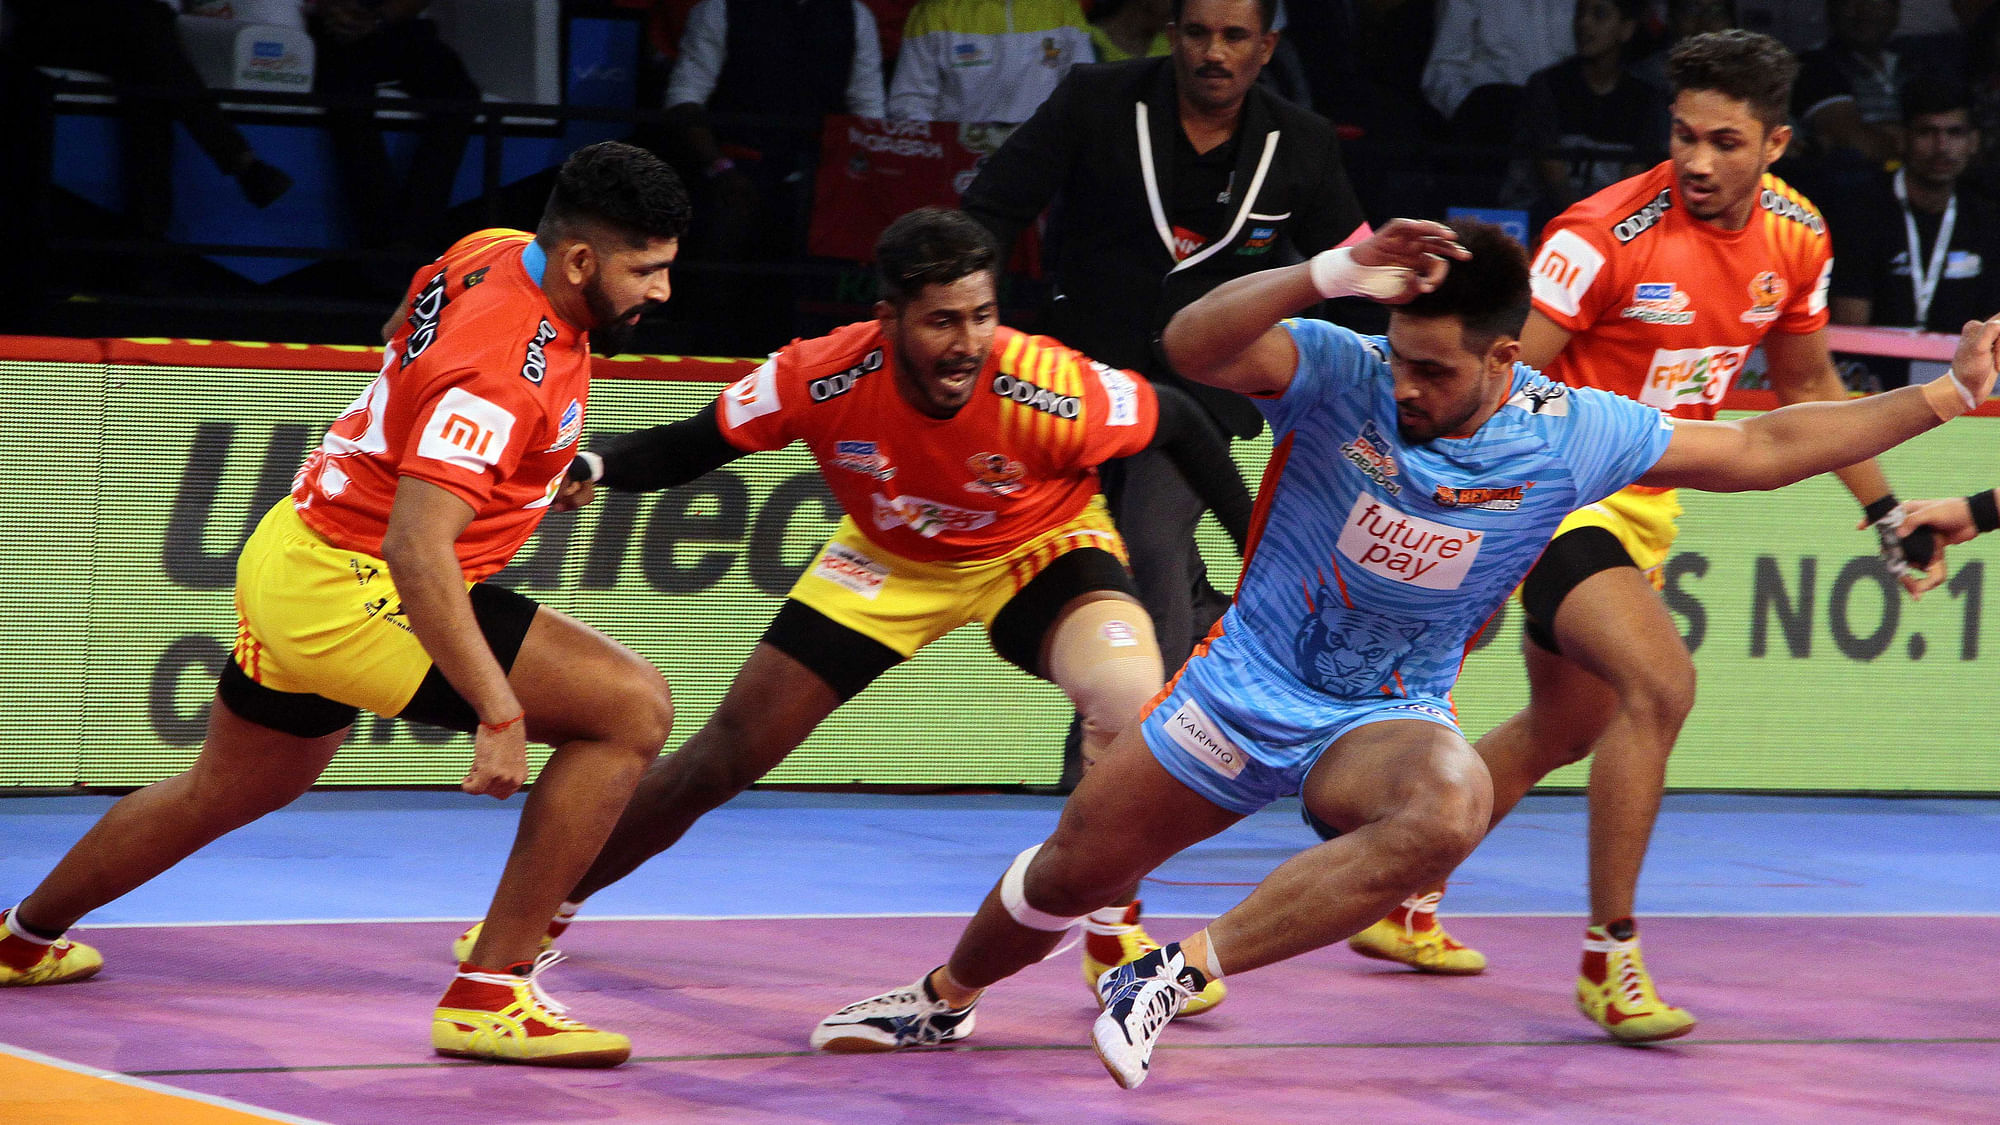 Gujarat Fortunegiants crushed Bengal Warriors 35-23 in the Inter Zone Challenge Week of the Pro Kabaddi League in Ahmedabad on Friday.